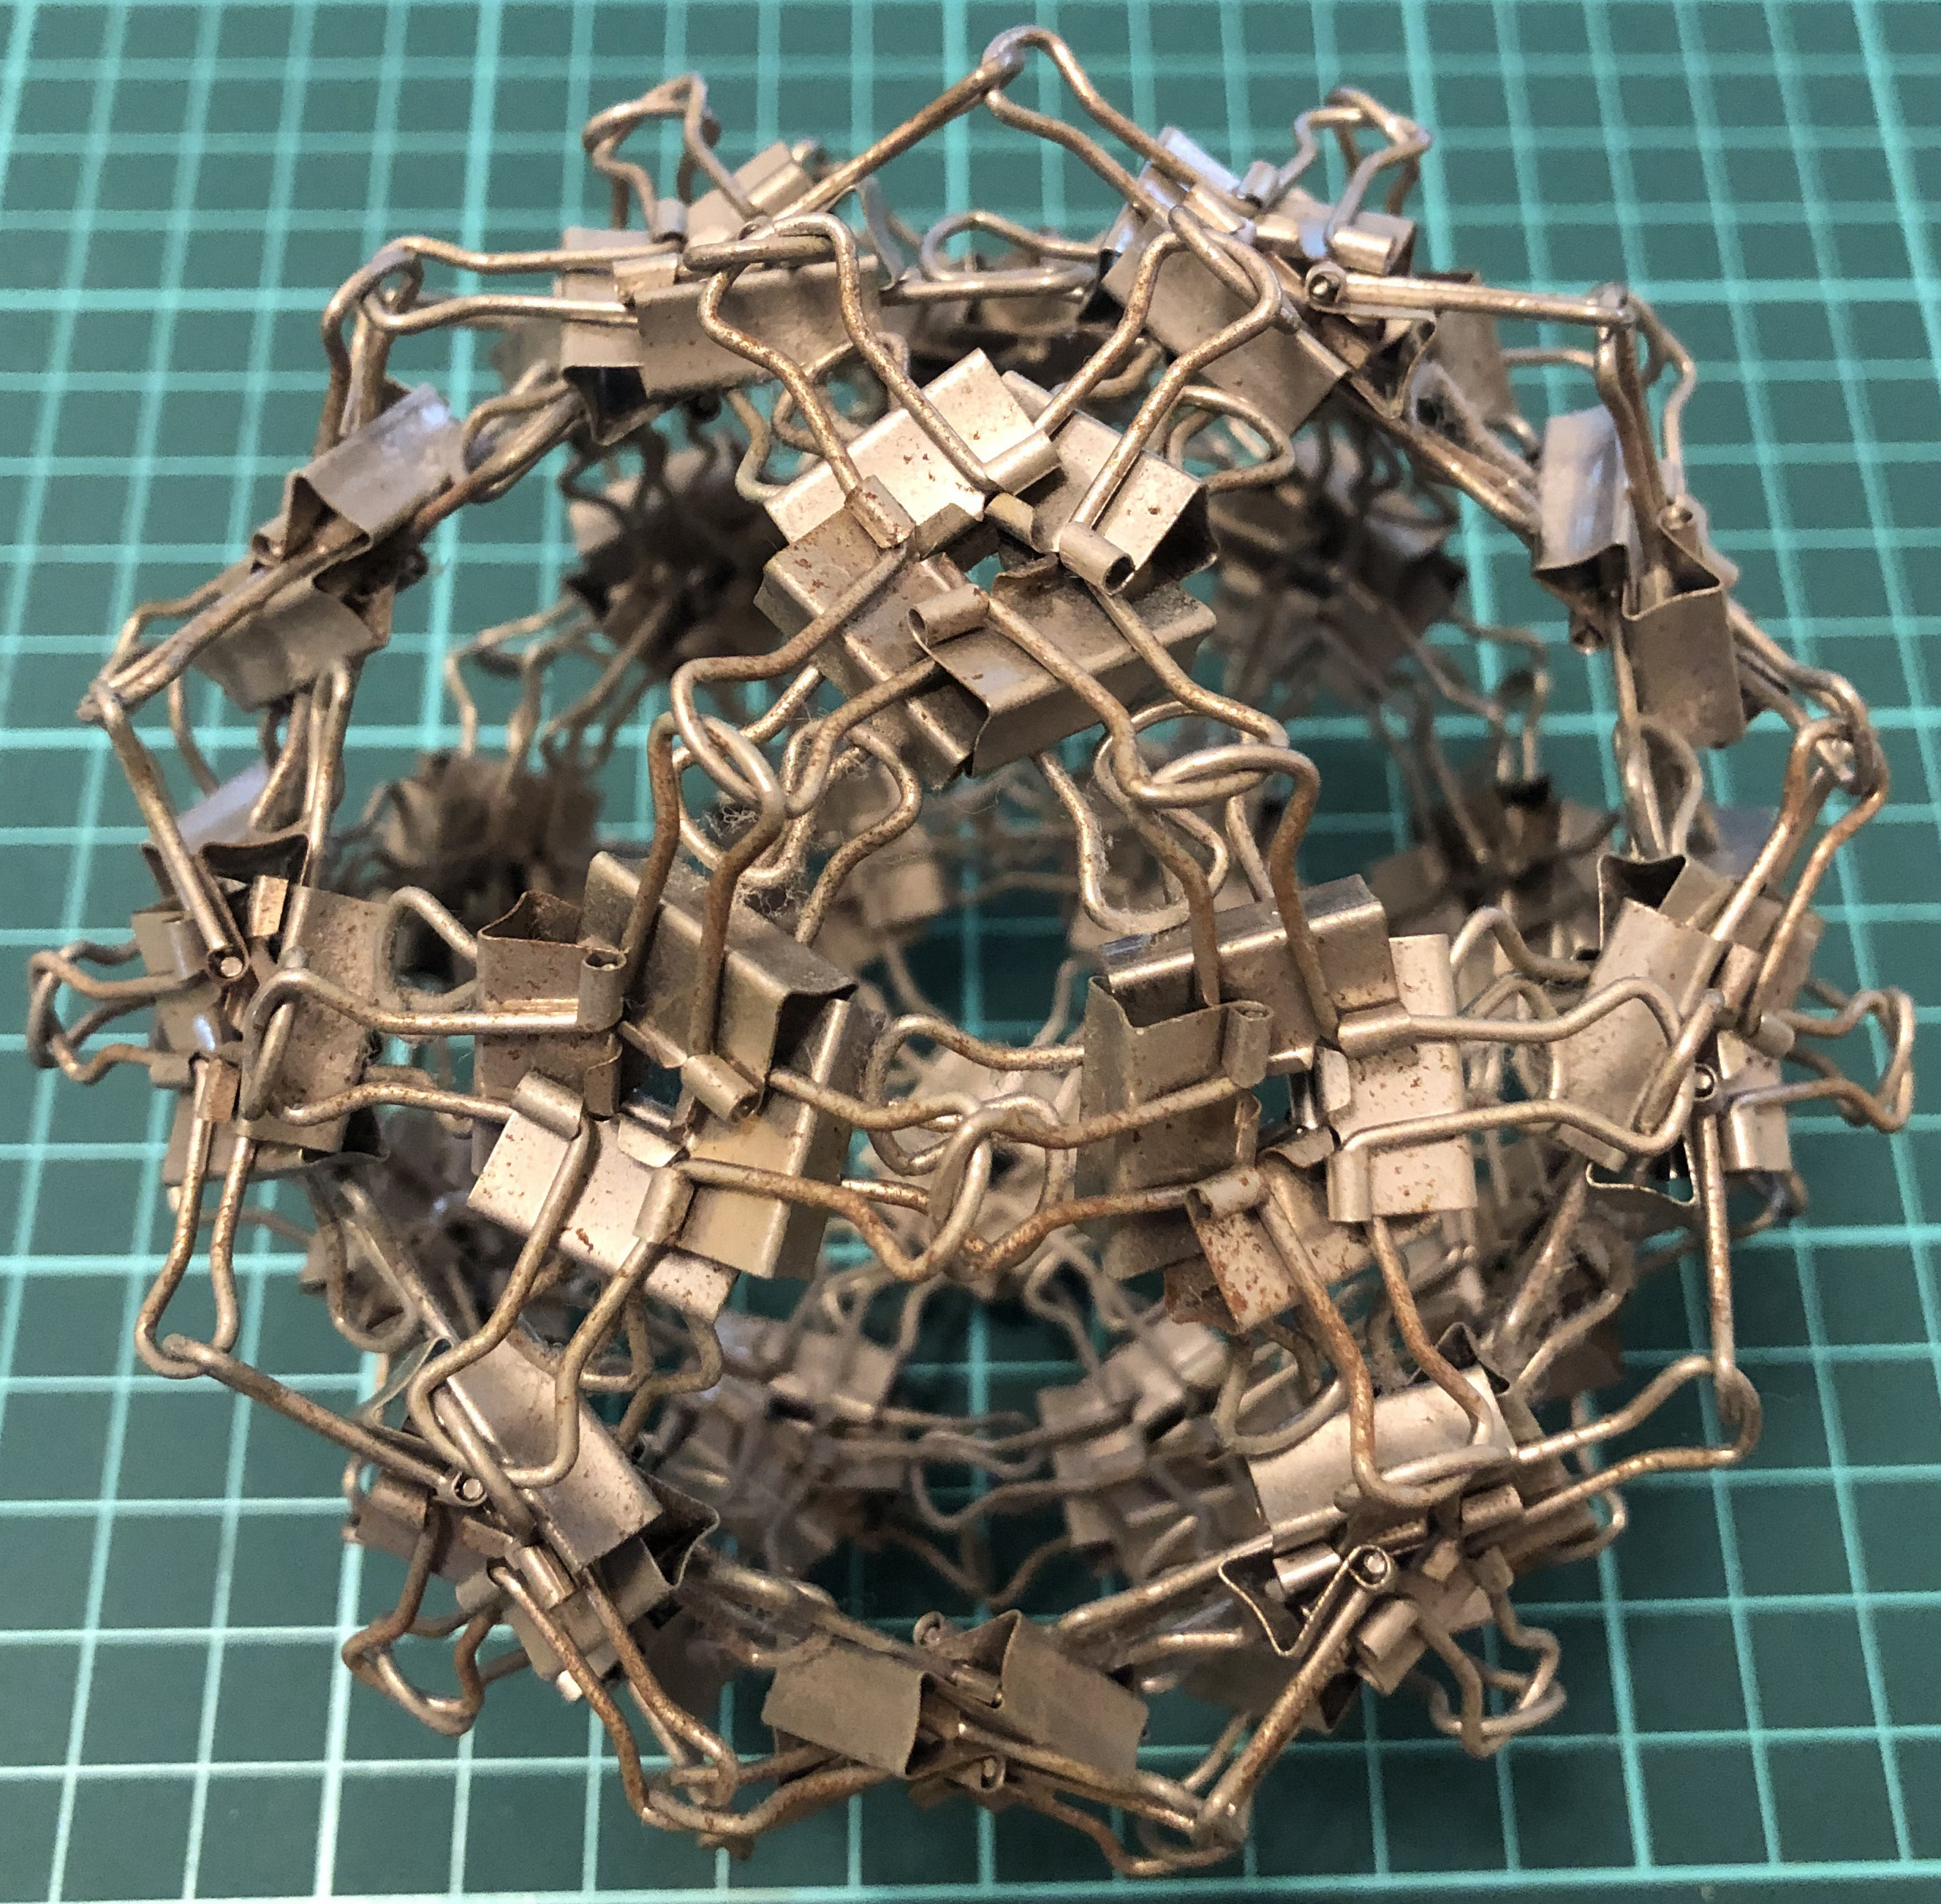 120 clips forming 60 W-edges forming icosidodecahedron